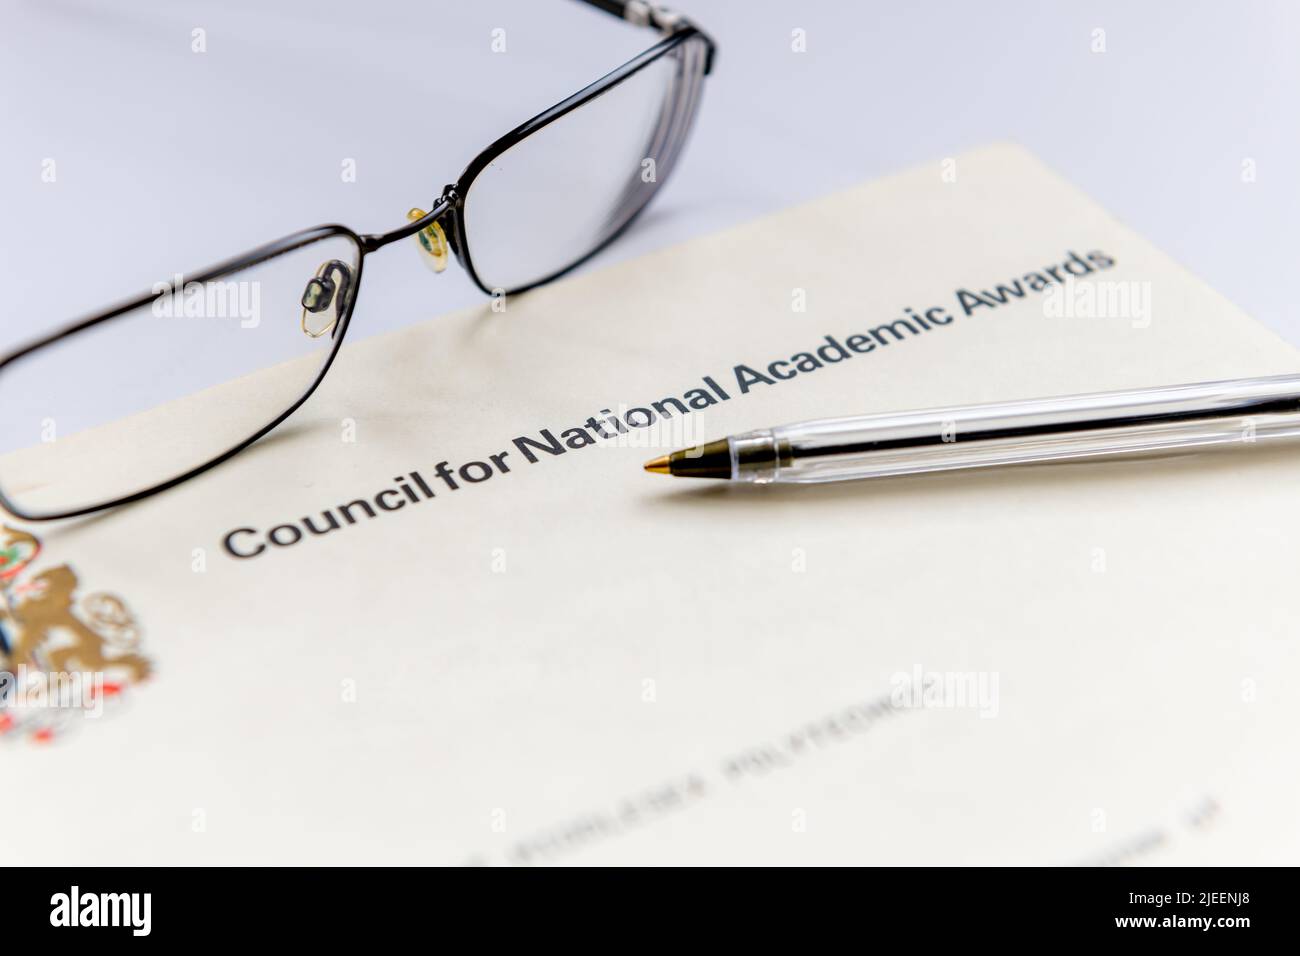 A United Kingdom higher education certificate issued by the Council for National Academic Awards shown with a pair of glasses and a pen. Stock Photo